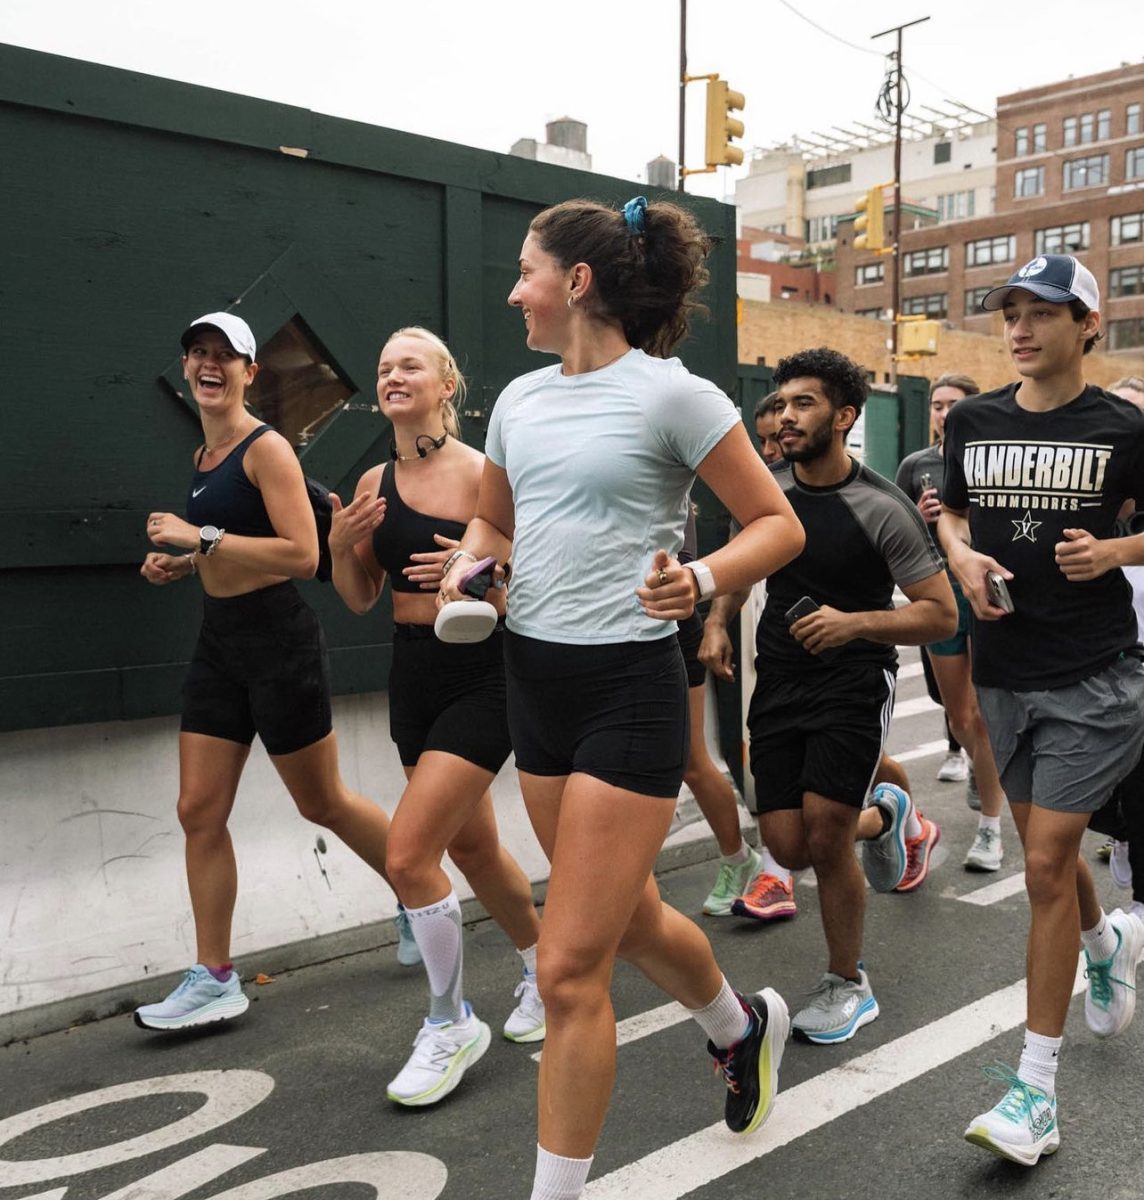 Fitness influencer Kate Glavan boosted morale at her monthly run club. (Courtesy of Instagram)